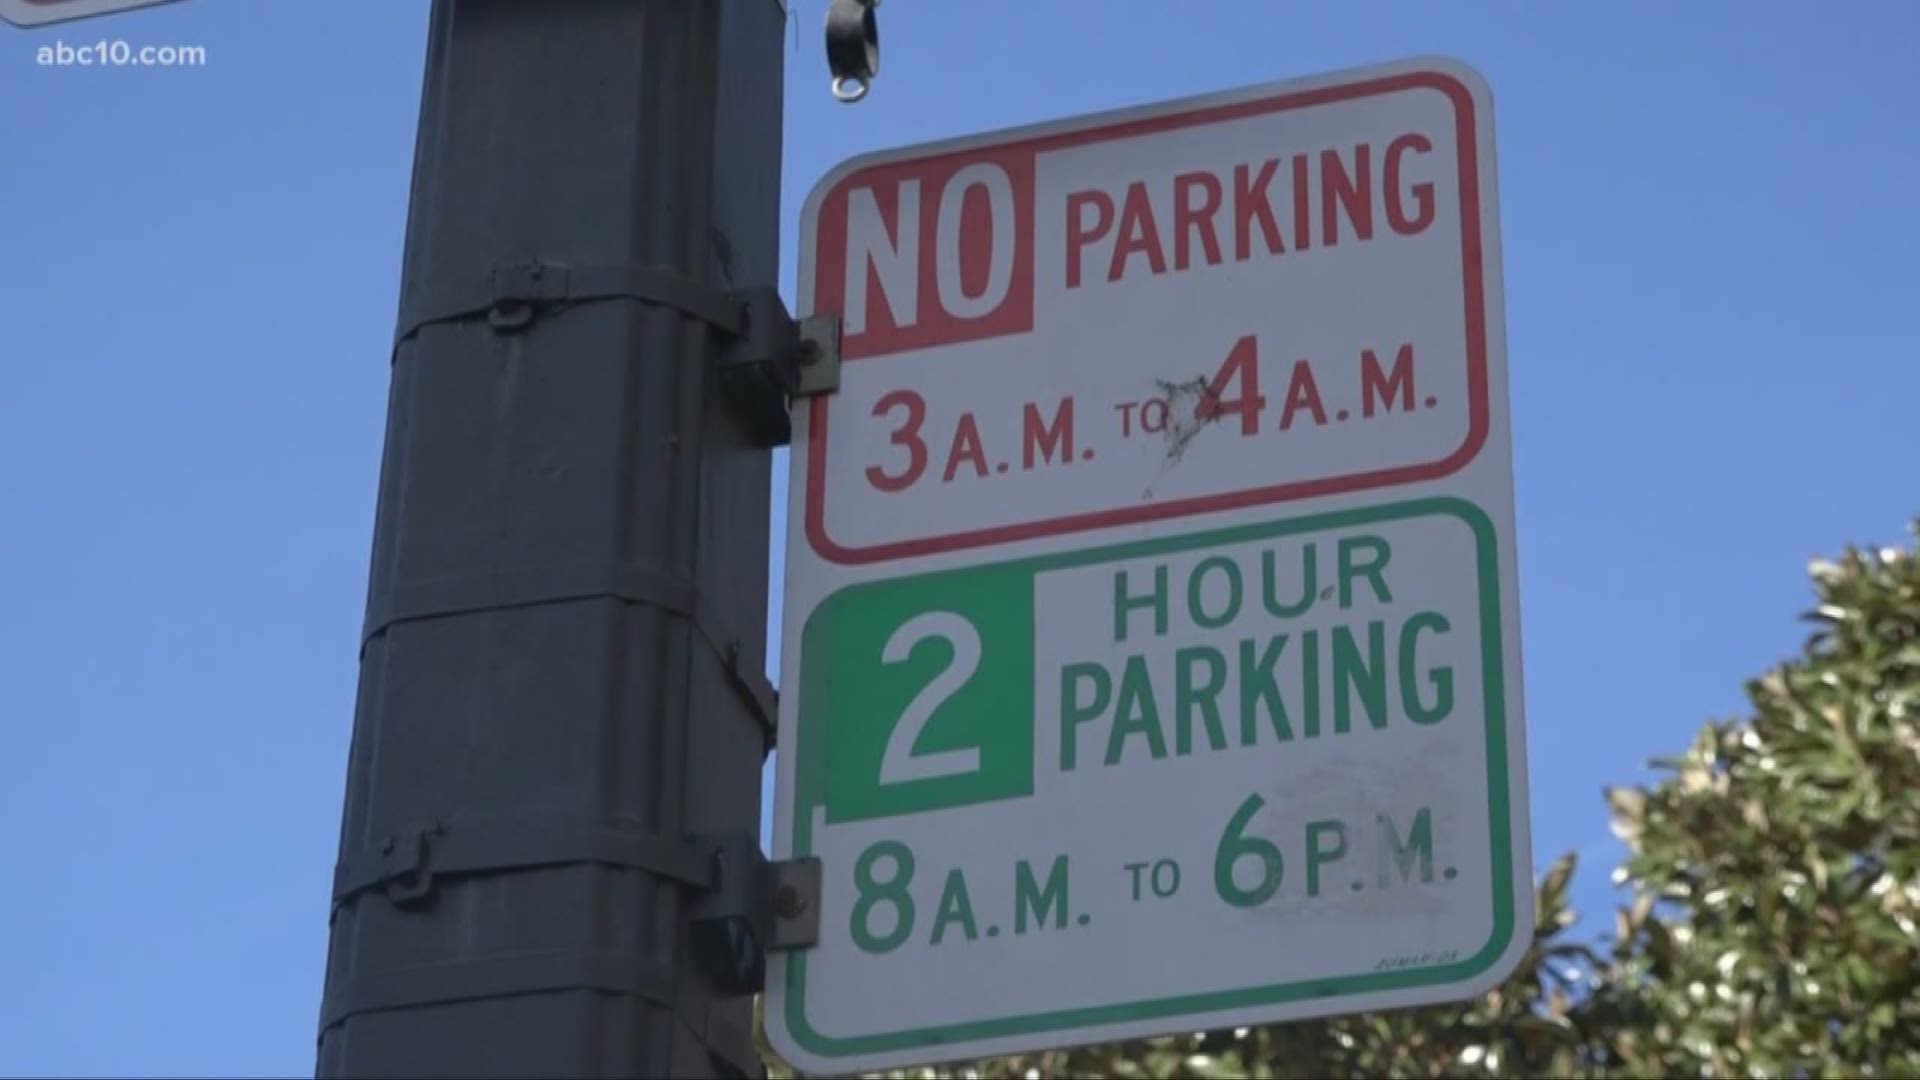 Drivers will be paying steeper fines, some more than double than the previous fees if they overstay their parking spots in the city of Modesto. i